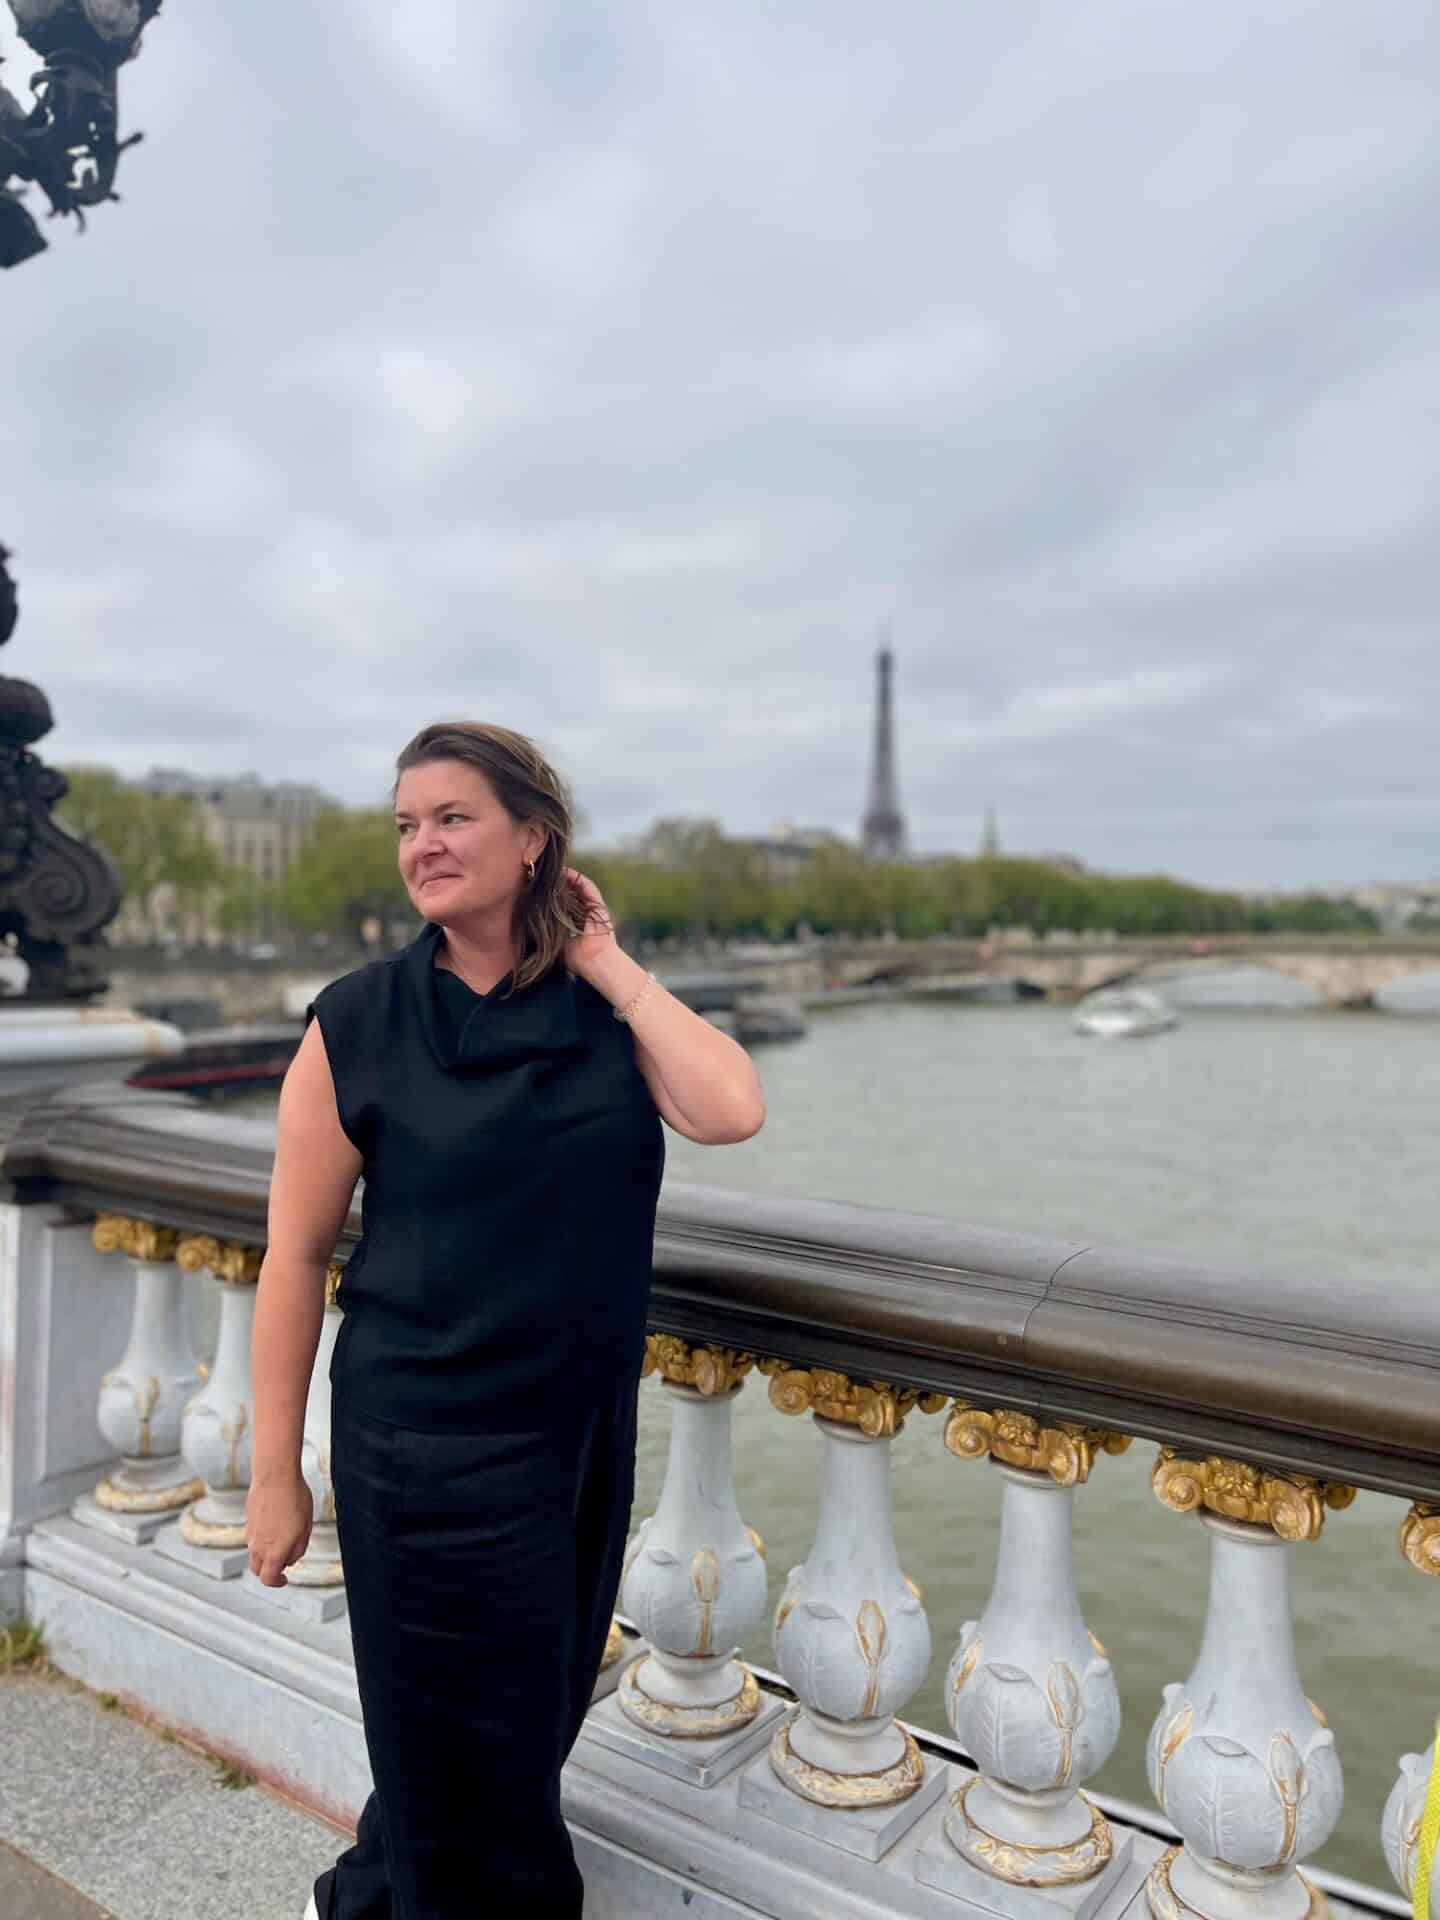 A woman in elegant black attire poses thoughtfully on a Parisian bridge, with the iconic silhouette of the Eiffel Tower in the background. The soft light of an overcast sky gives the scene a serene ambiance, reflecting the contemplative solitude of solo travel.